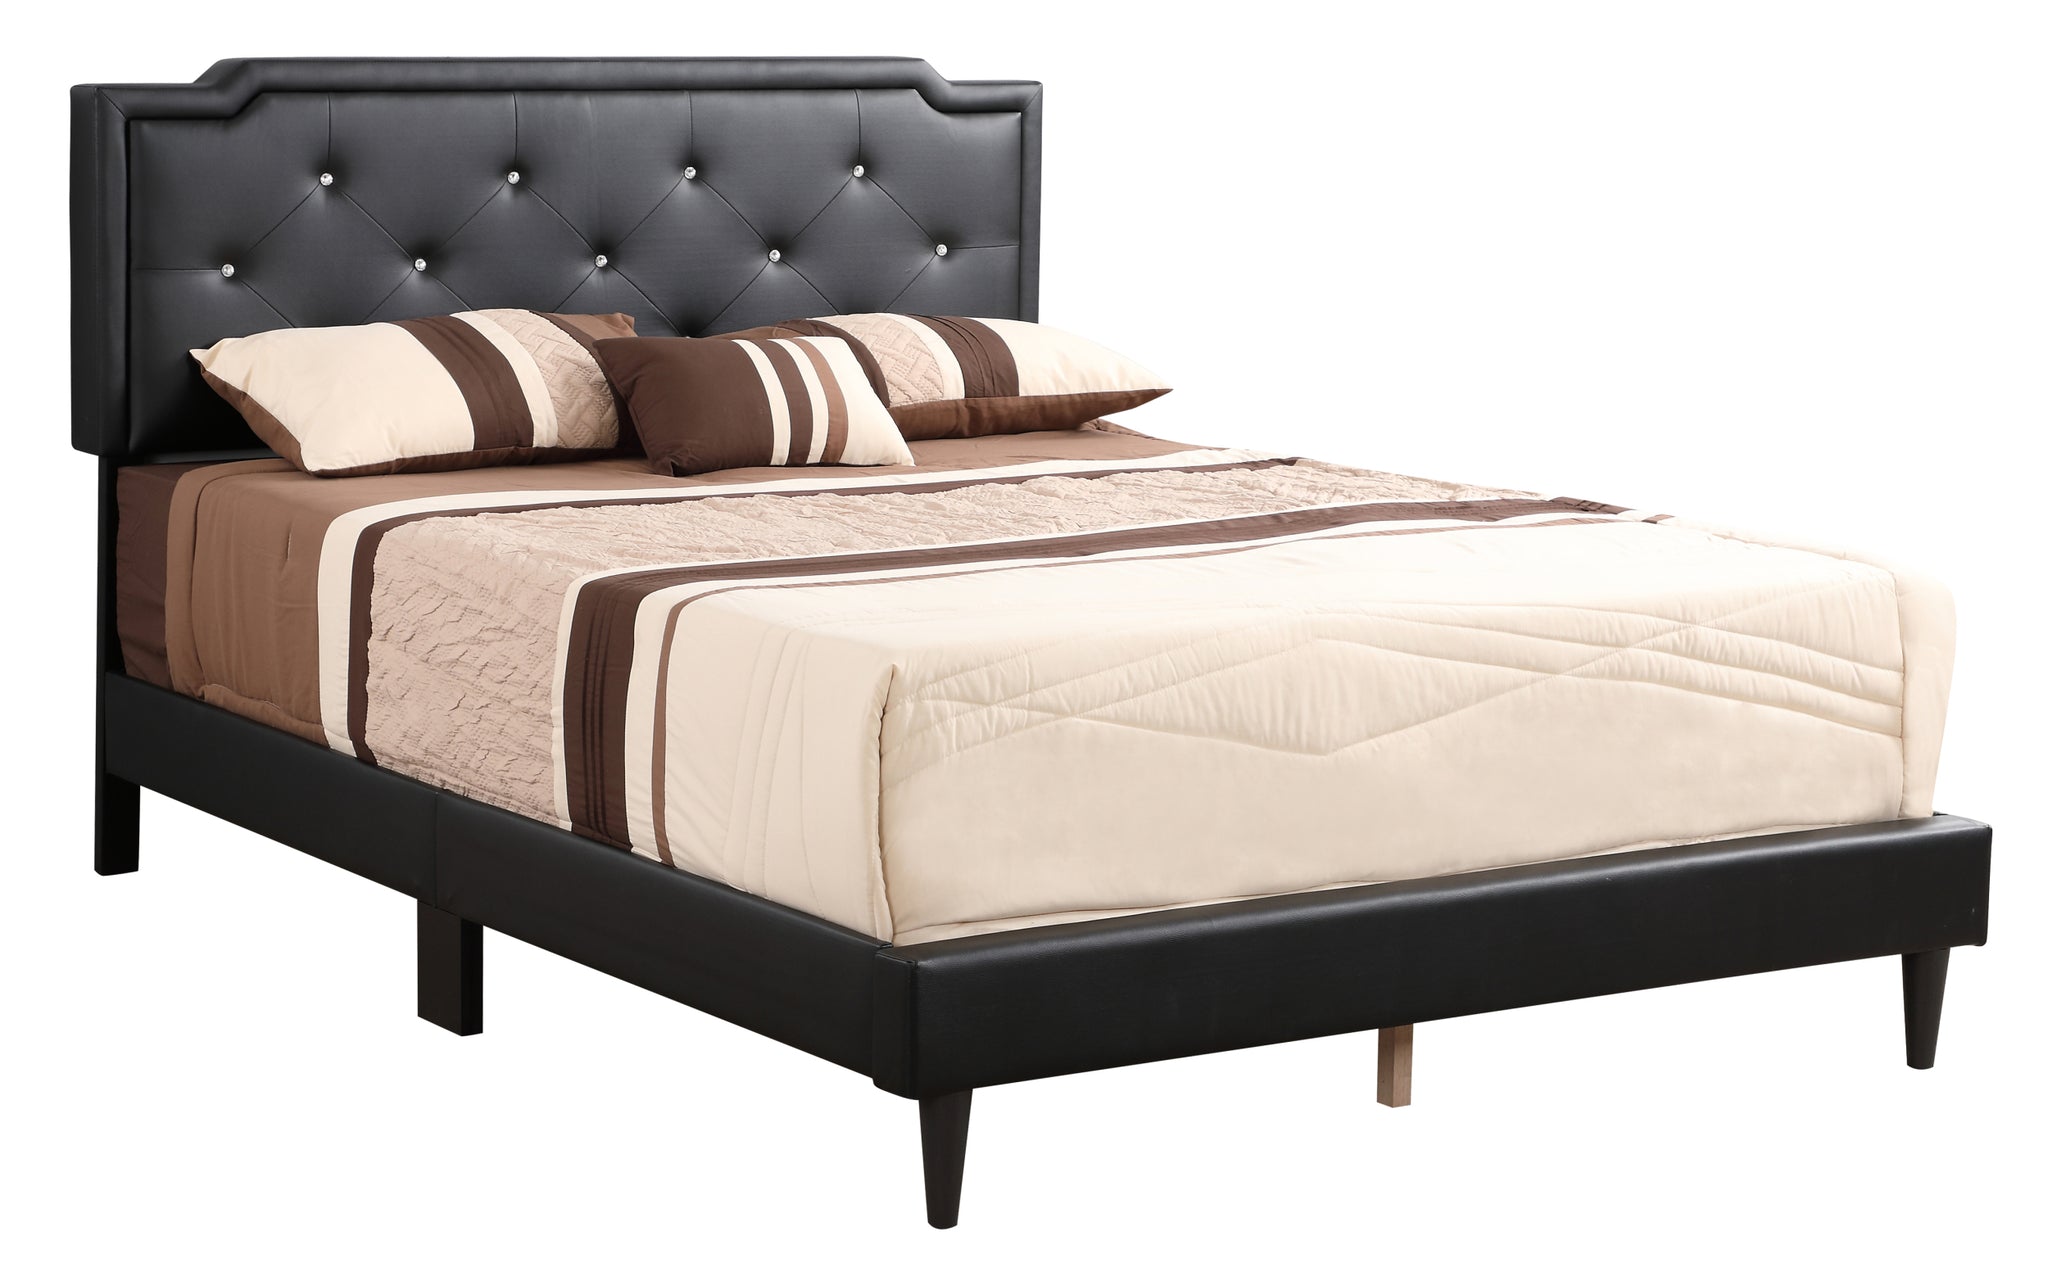 Deb G1119 KB UP King Bed All in One black-foam-pu